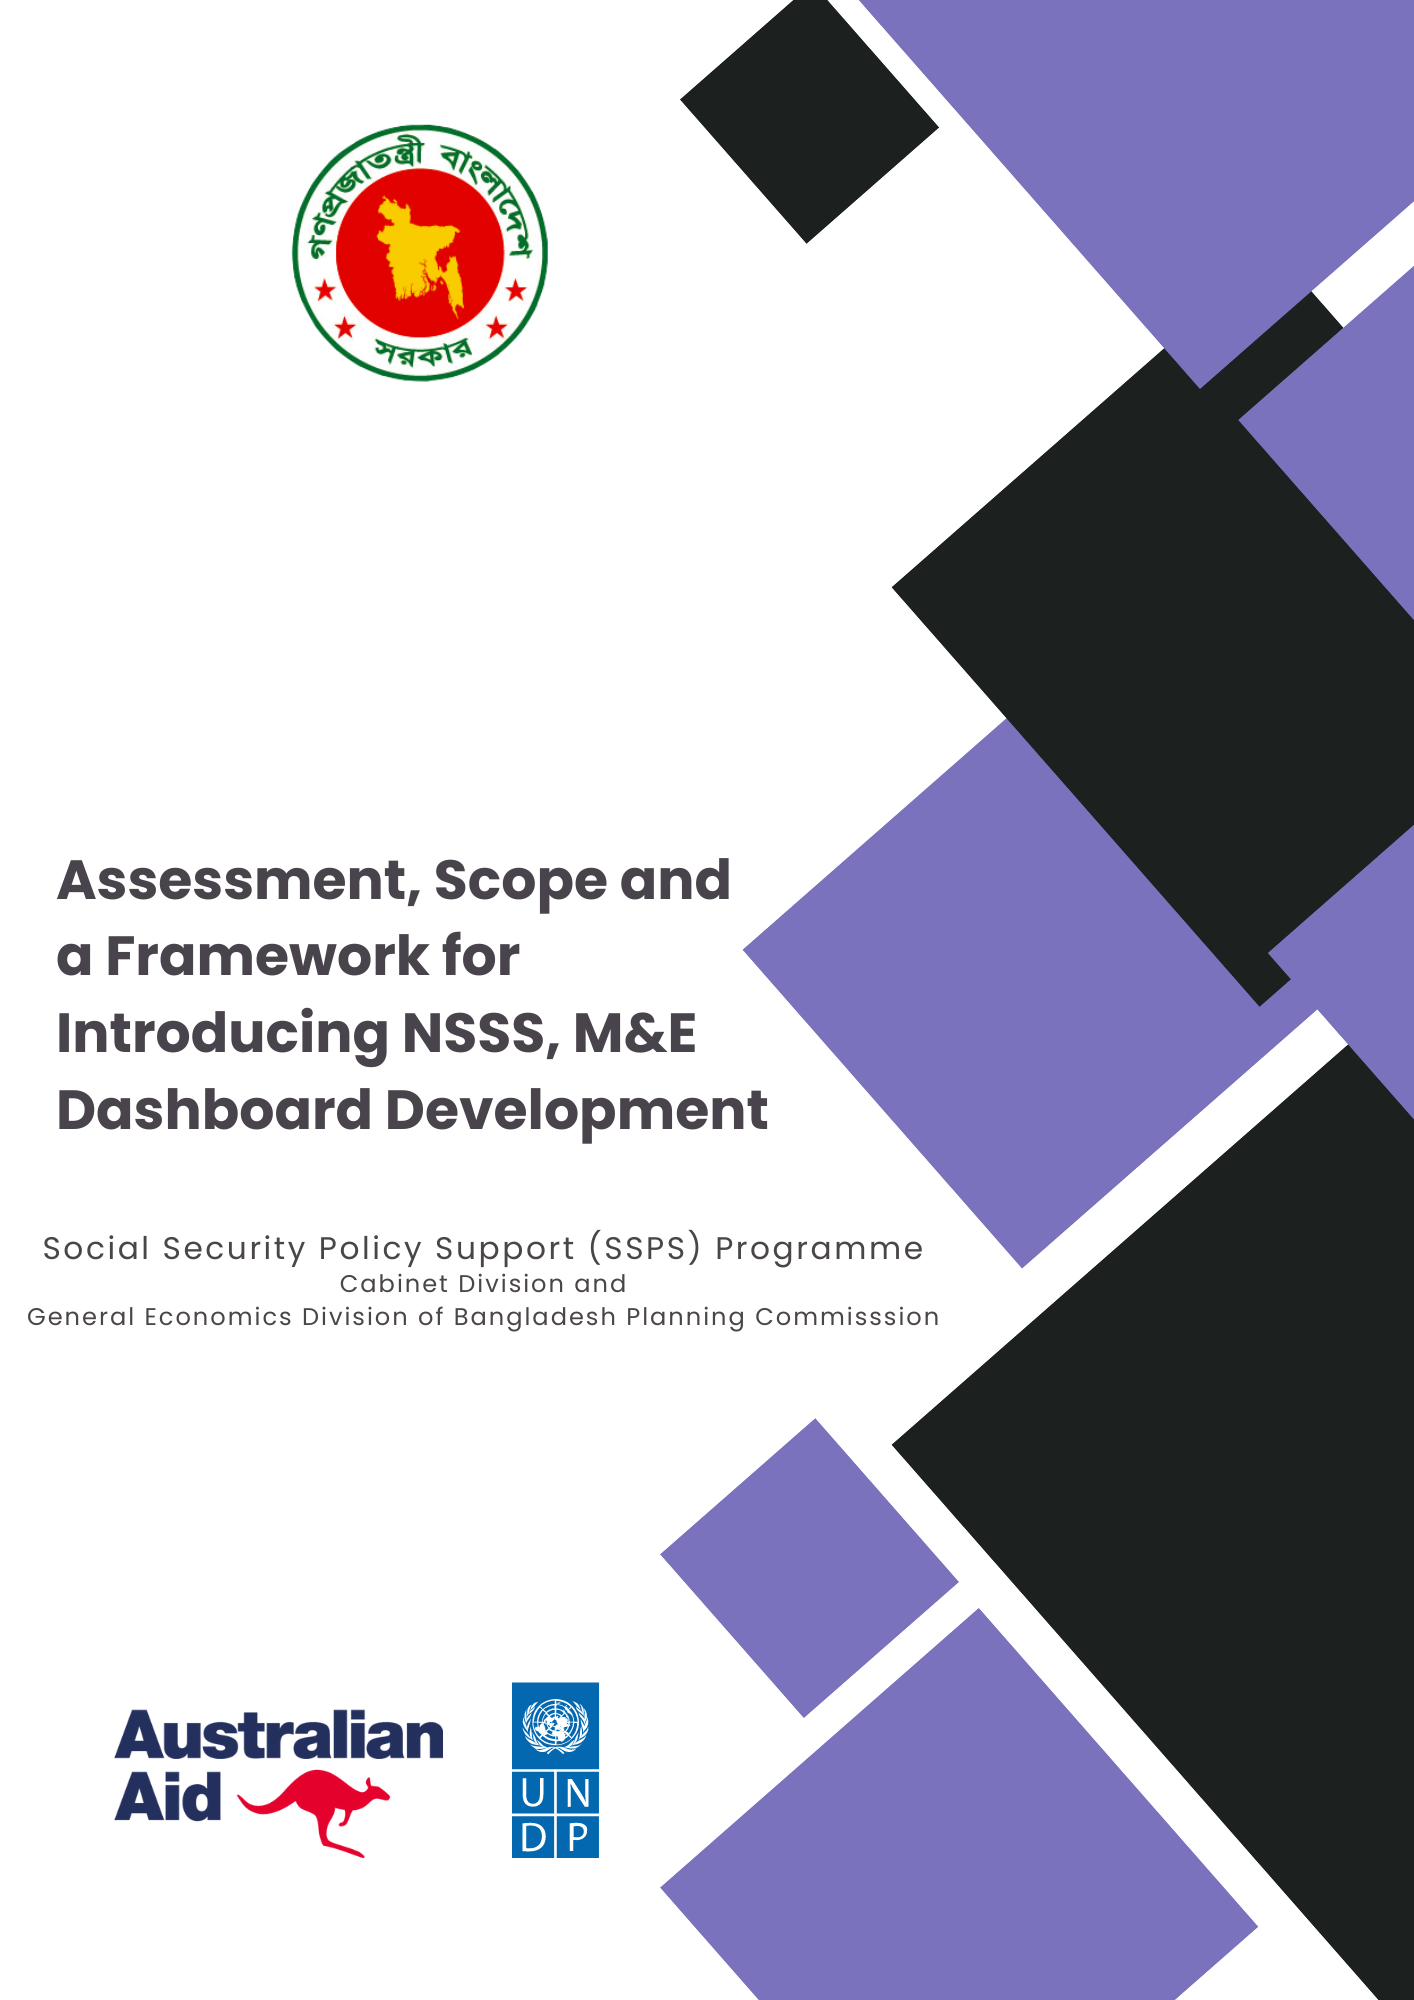 Assessment, Scope and a Framework for Introducing NSSS, M&E Dashboard Development